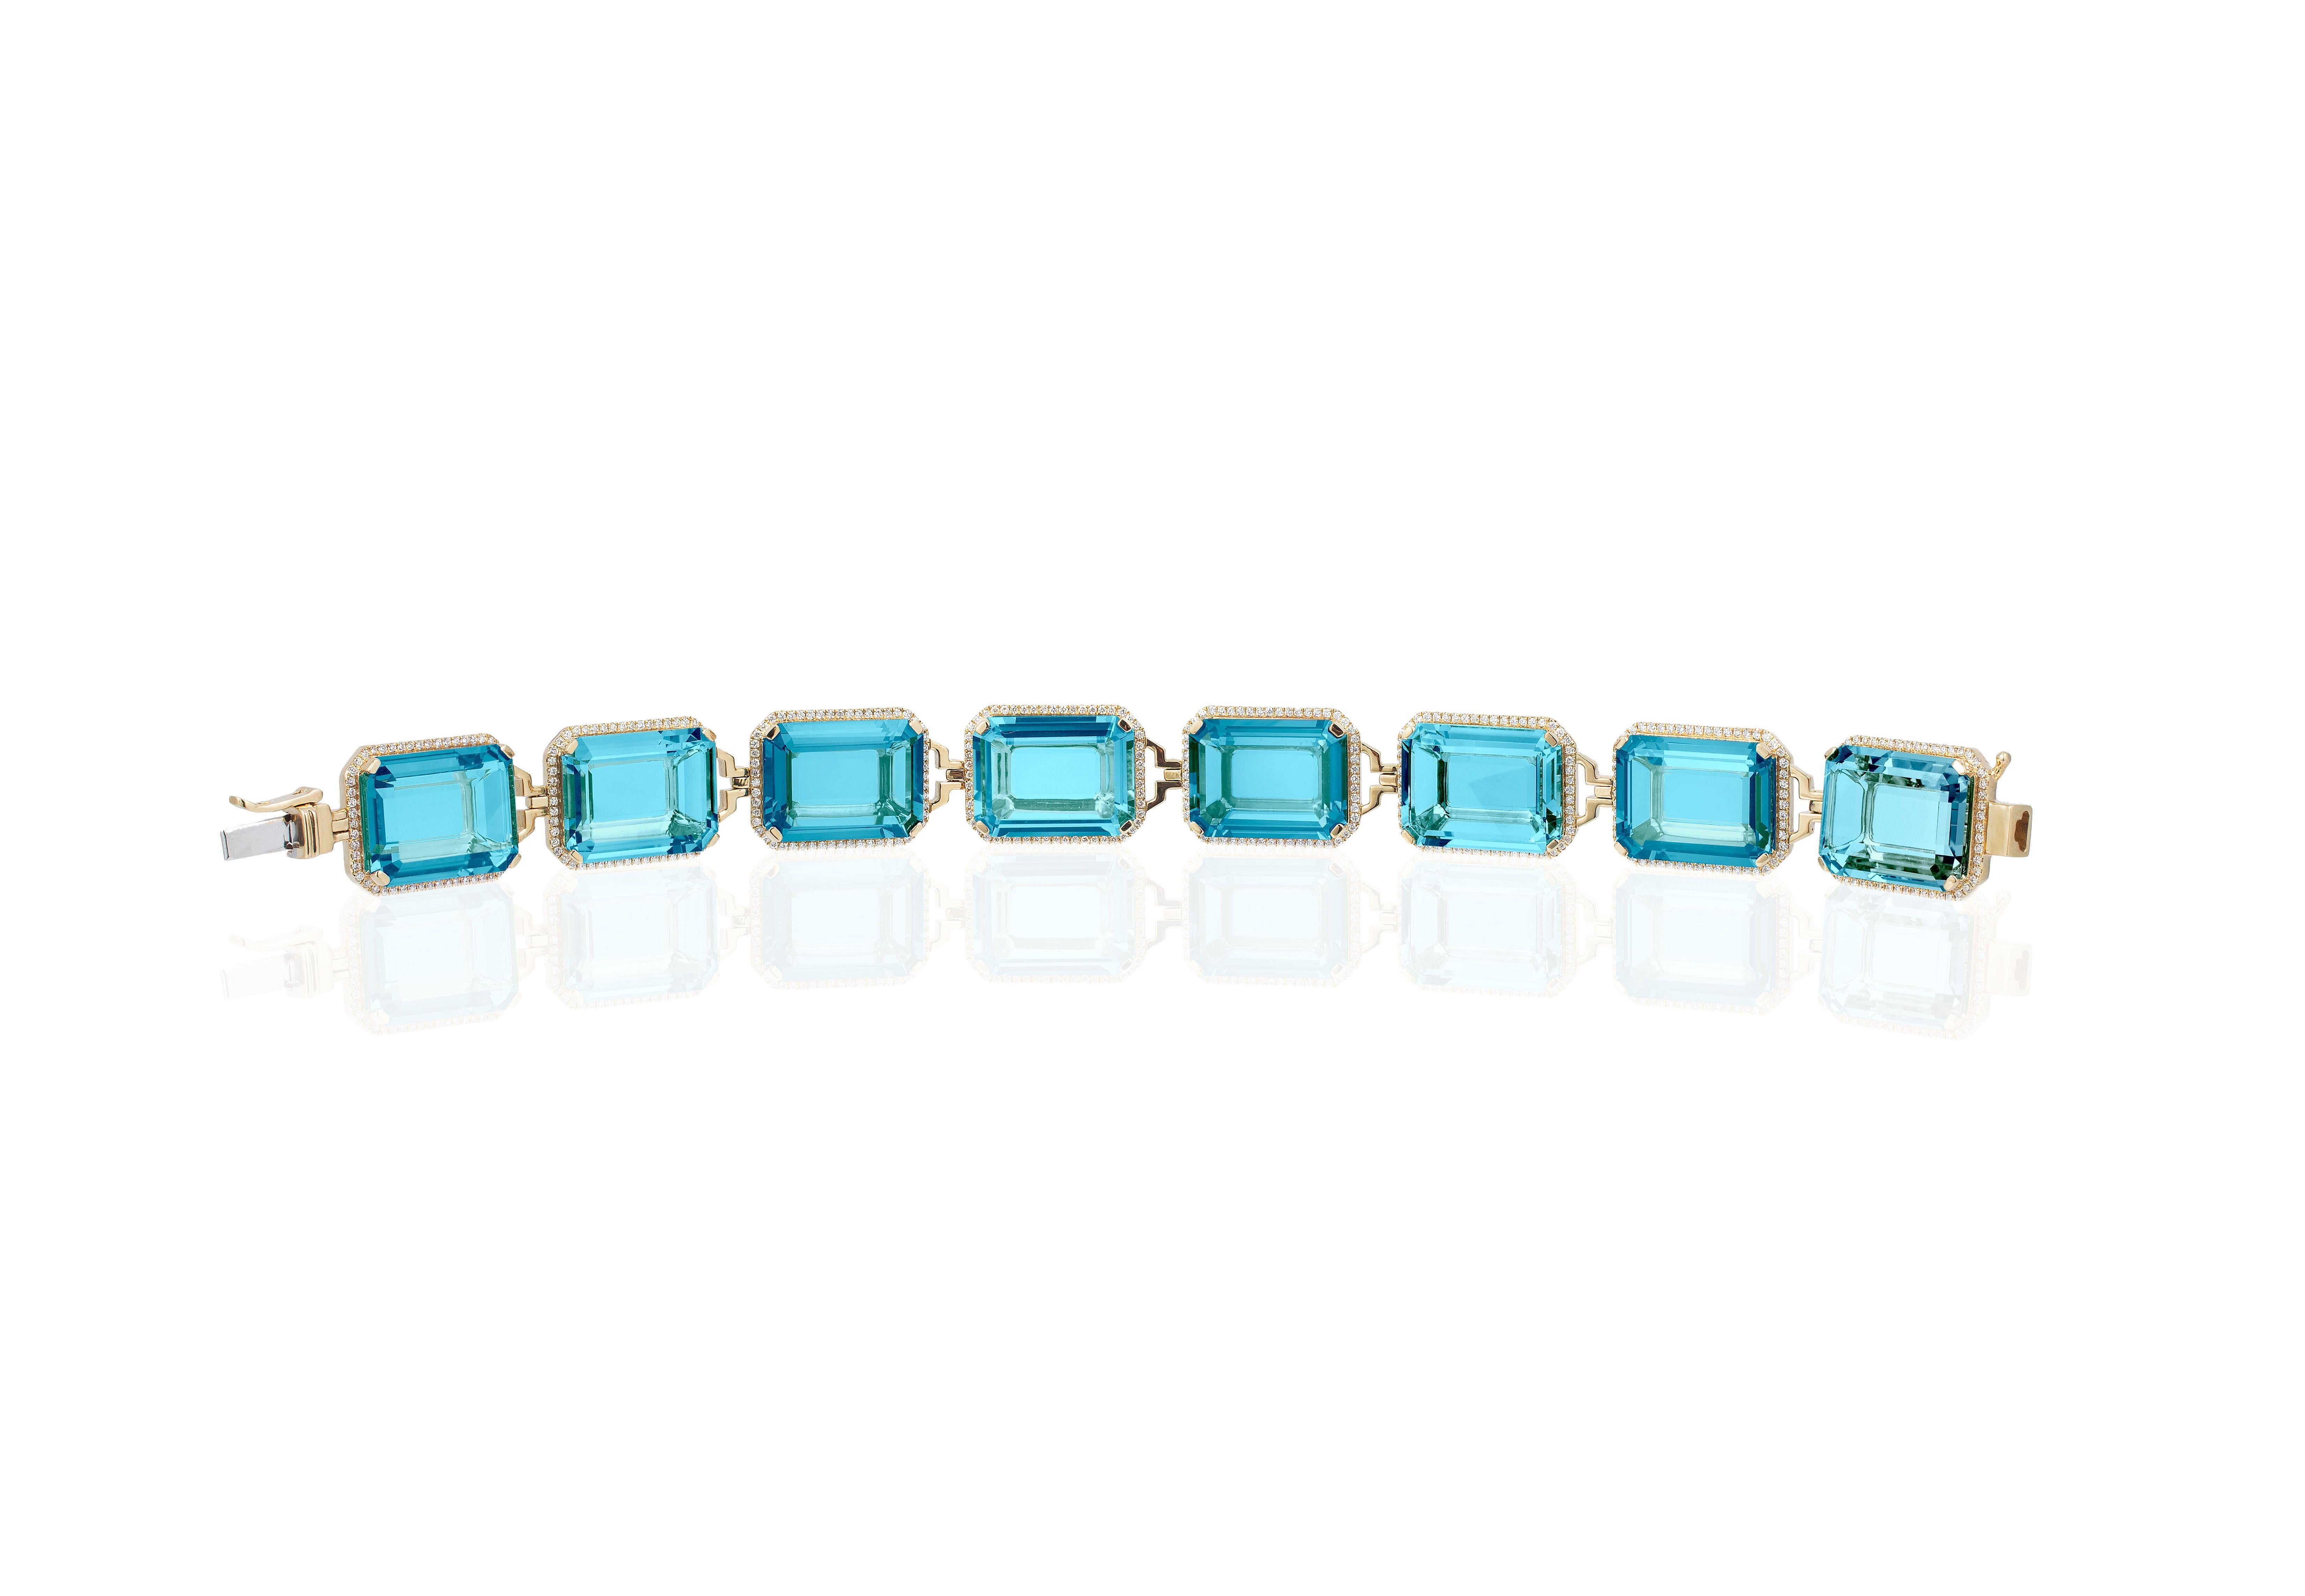 Blue Topaz Emerald Cut Bracelet with Diamonds in 18K Yellow Gold from ’Gossip’ Collection

 *Bracelet Length: 6 3/4'' 
  (The size can be adjusted as per request)
 *Gemstone Size: 16 x 12 mm 

 *Approx Carat: 1.25 Carat (Diamonds)
 *Diamond: G/H
